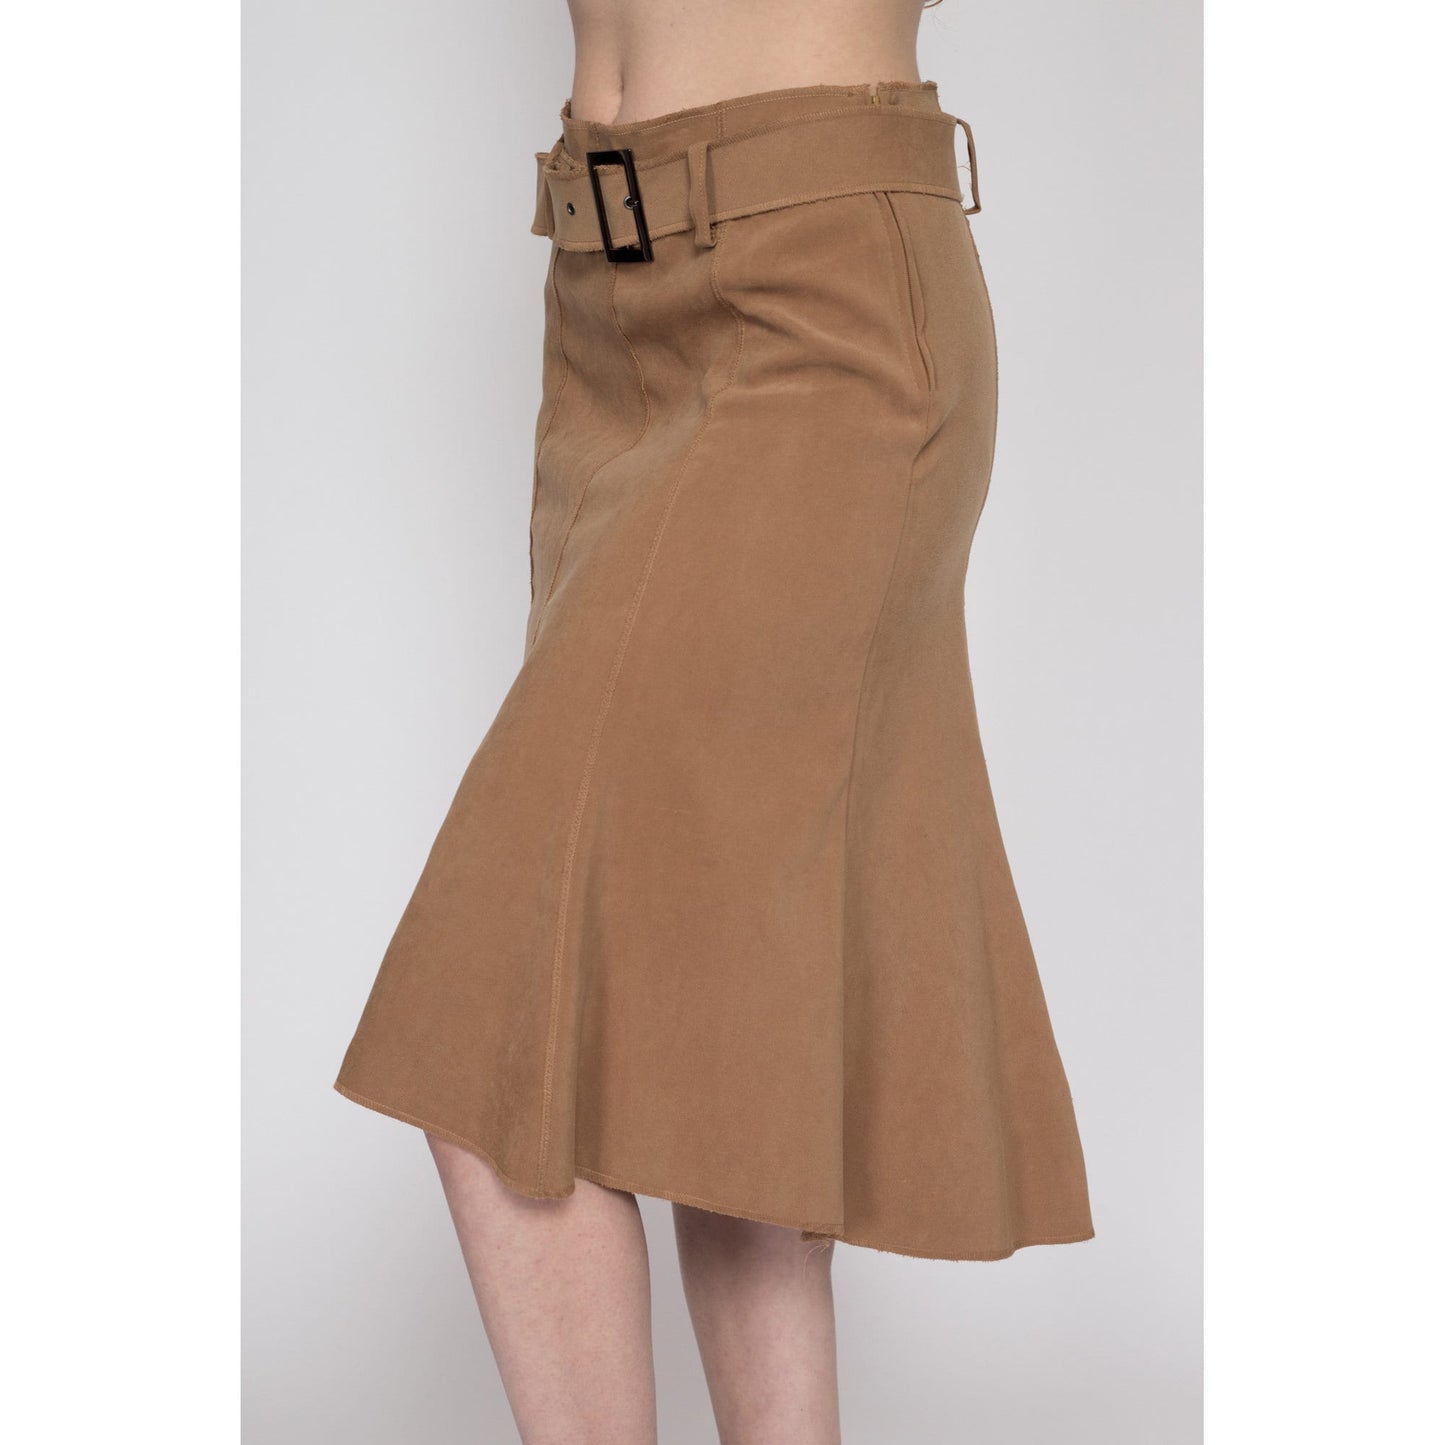 Medium 90s Brown Belted High-Low Midi Skirt 30" | Vintage High Waisted A Line Skirt